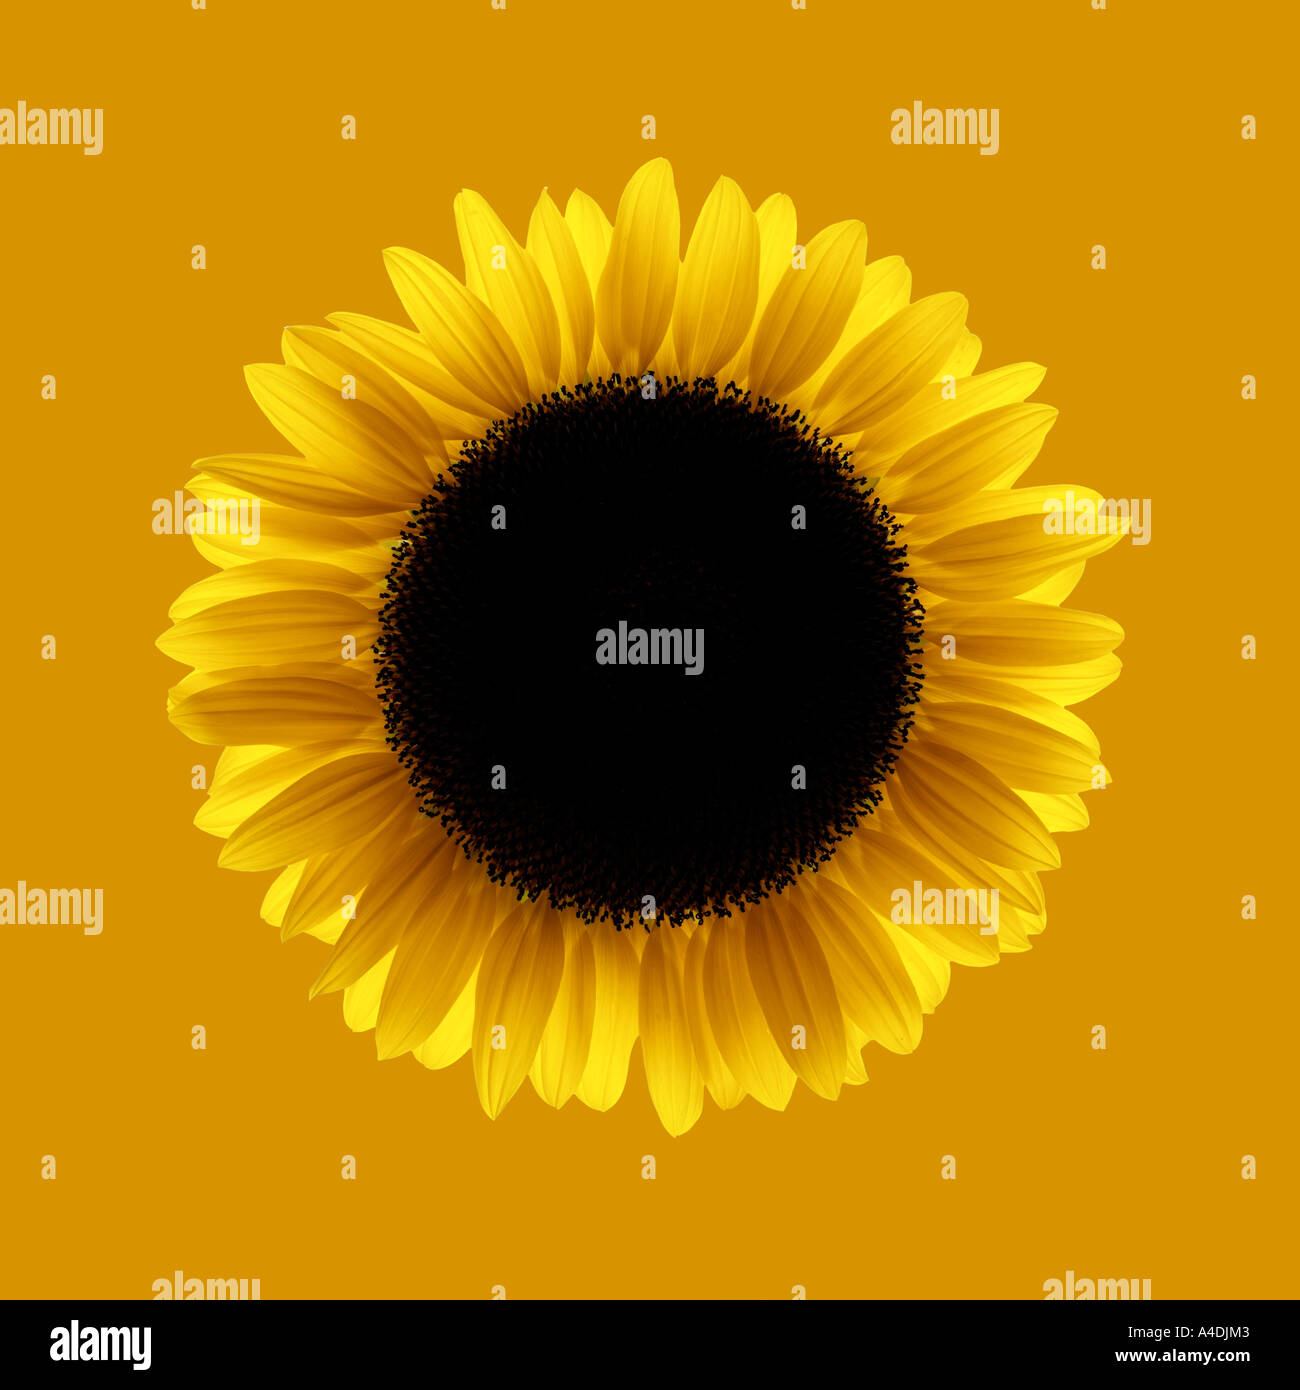 Sunflower, Helianthus annuus, detail showing larger outer ray florets and small central disc florets Stock Photo